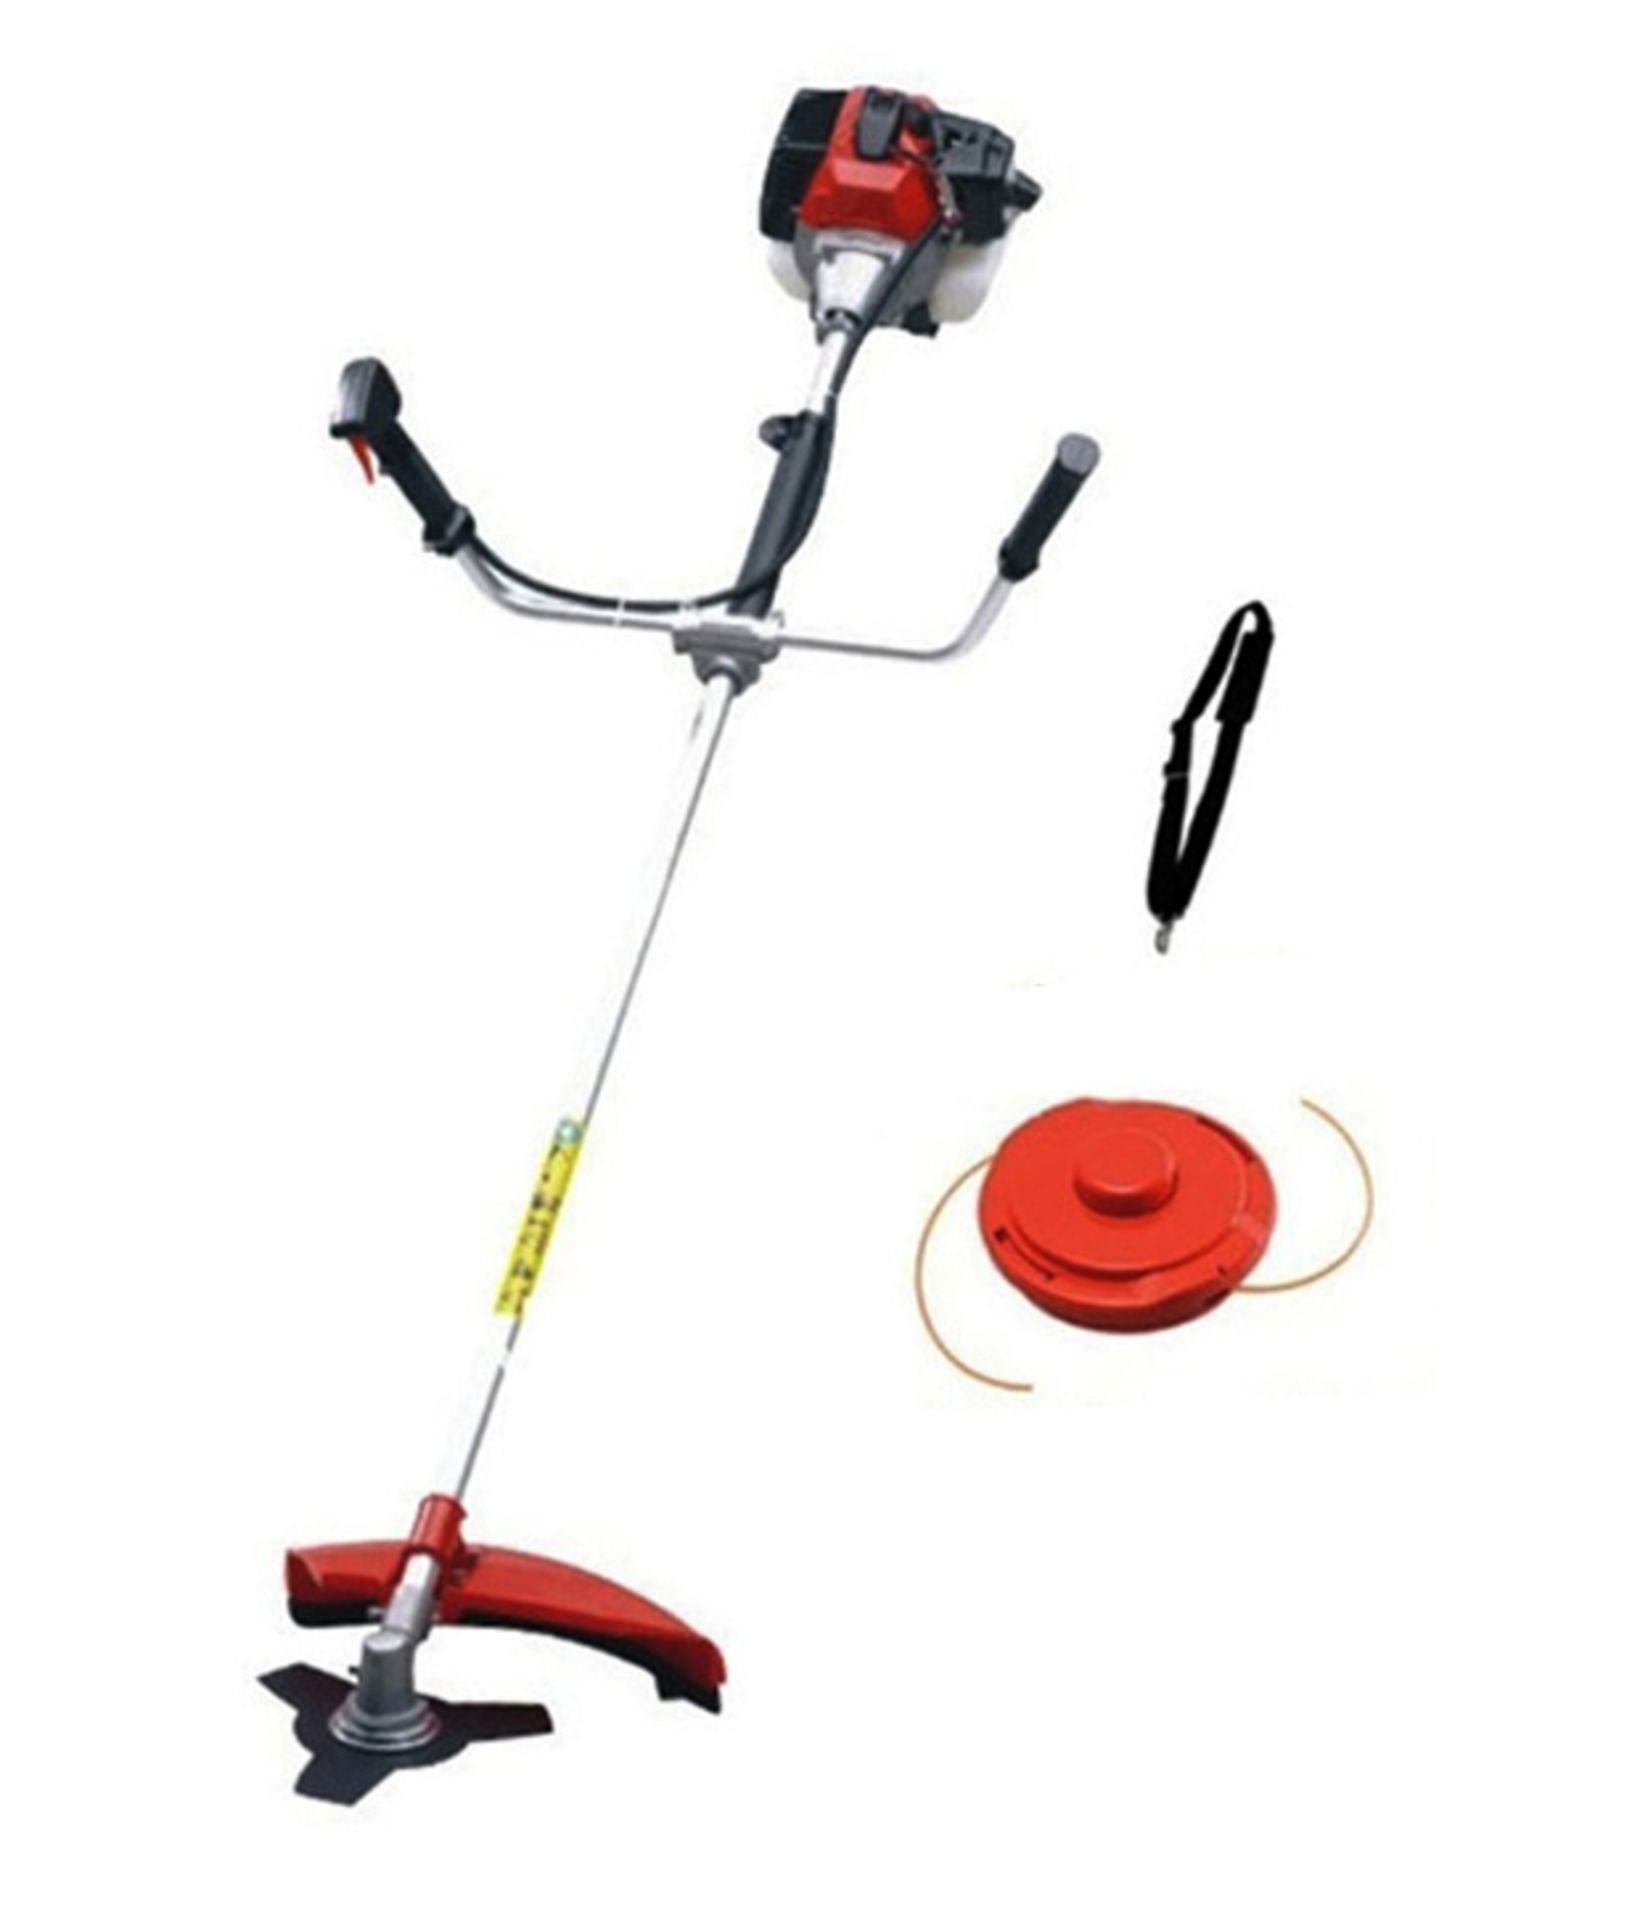 V Brand New 55cc Petrol Strimmer With Brush Cutter (Two Boxes) X 2 YOUR BID PRICE TO BE MULTIPLIED